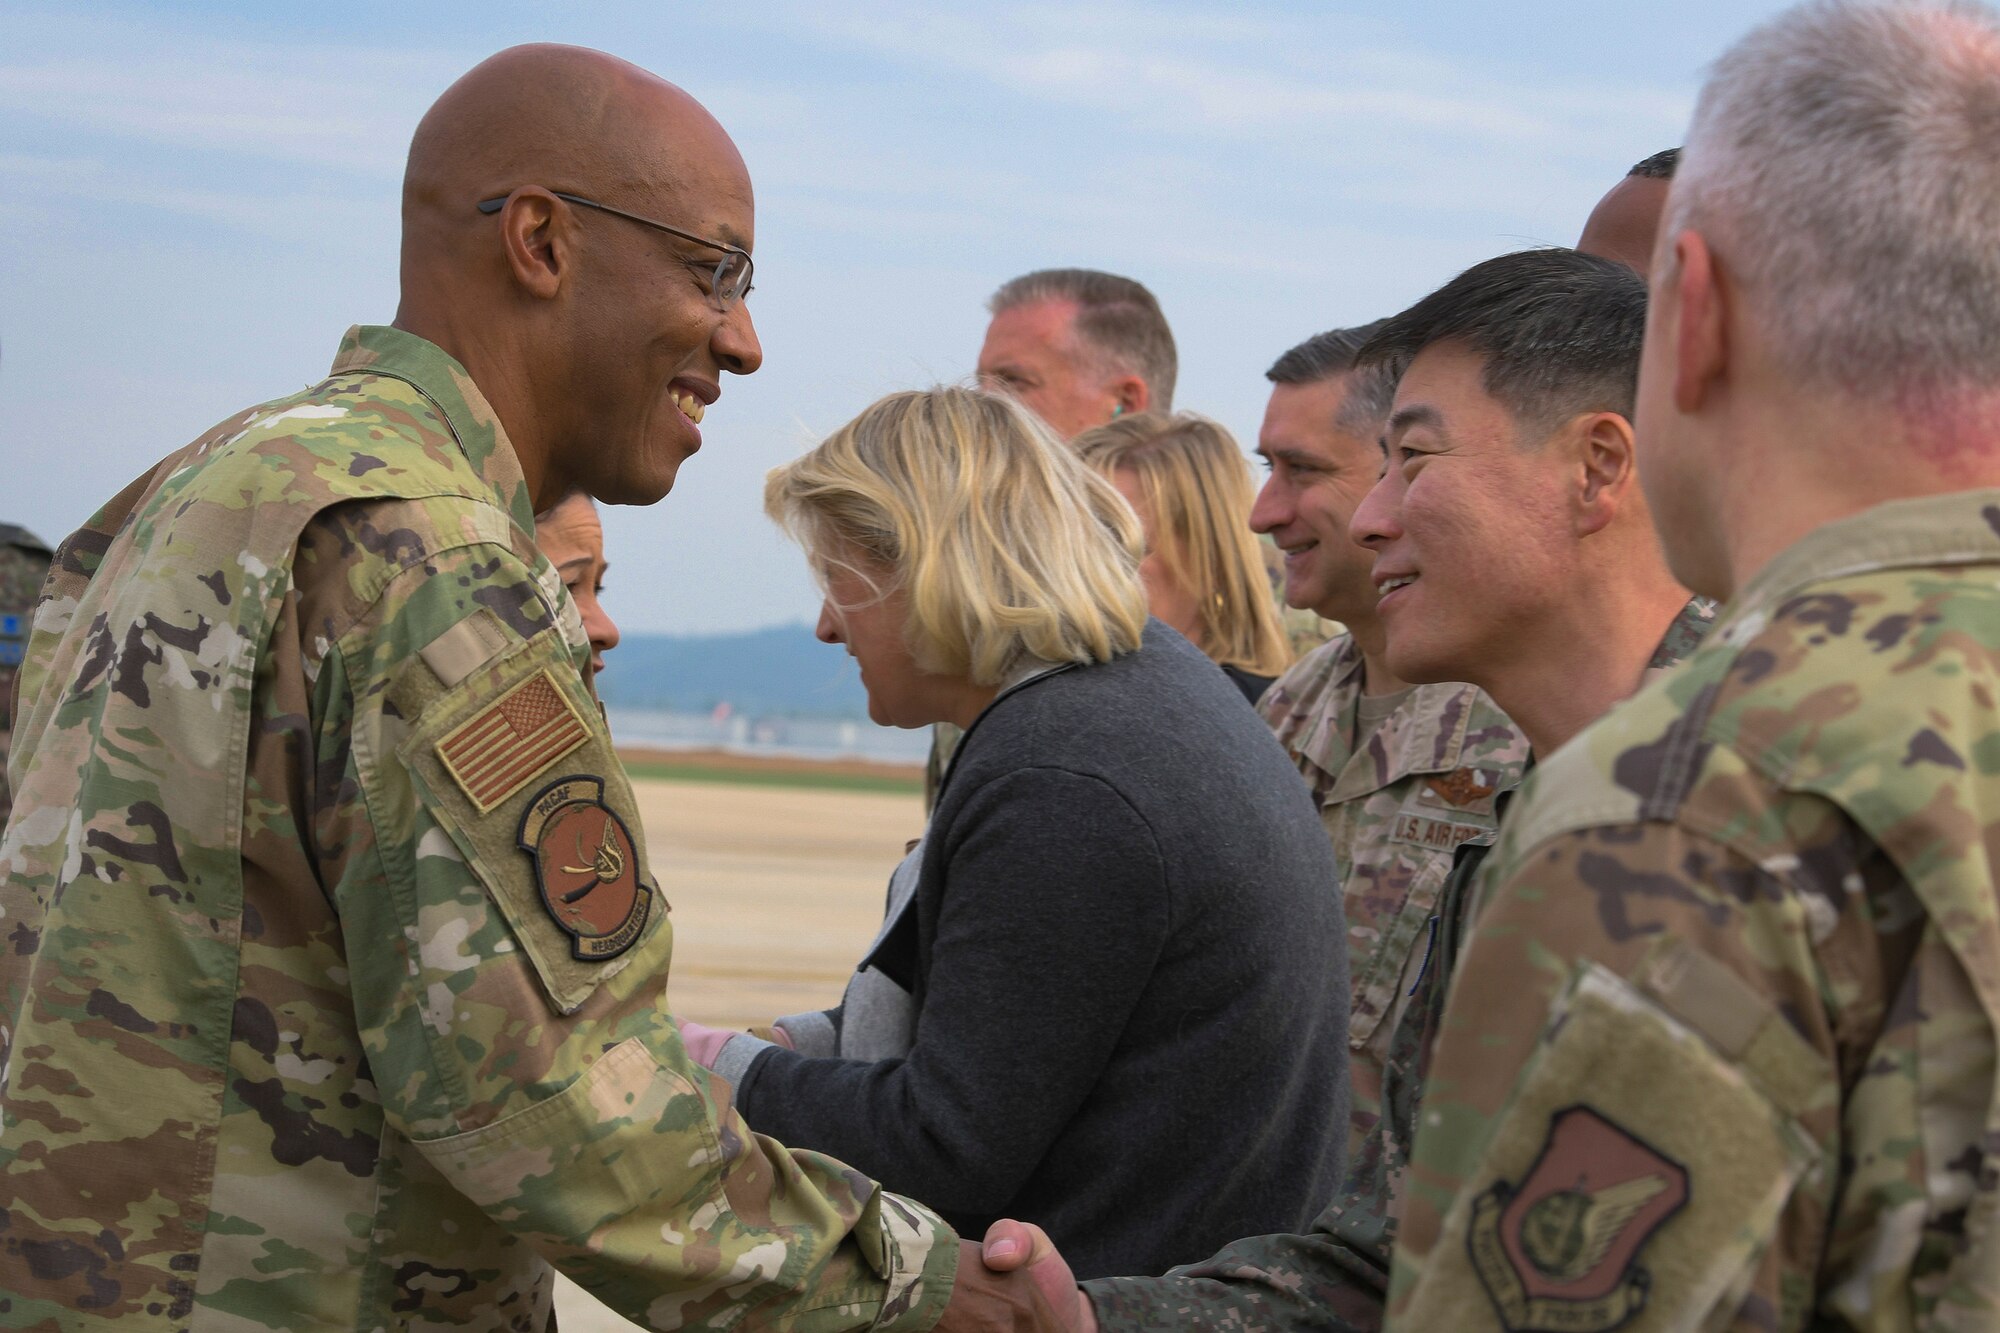 Gen. CQ Brown, Jr., Pacific Air Forces commander, visited the men and women of Osan Air Base, Republic of Korea, Oct. 17, 2019. While gaining an in-depth exposure of the installation’s unique mission, Brown used the visit as an opportunity to explain Pacific Air Force’s priorities and how vital Team Osan is in contributing to the Indo-Pacific region’s security and stability. (U.S. Air Force photo by Staff Sgt. Greg Nash)